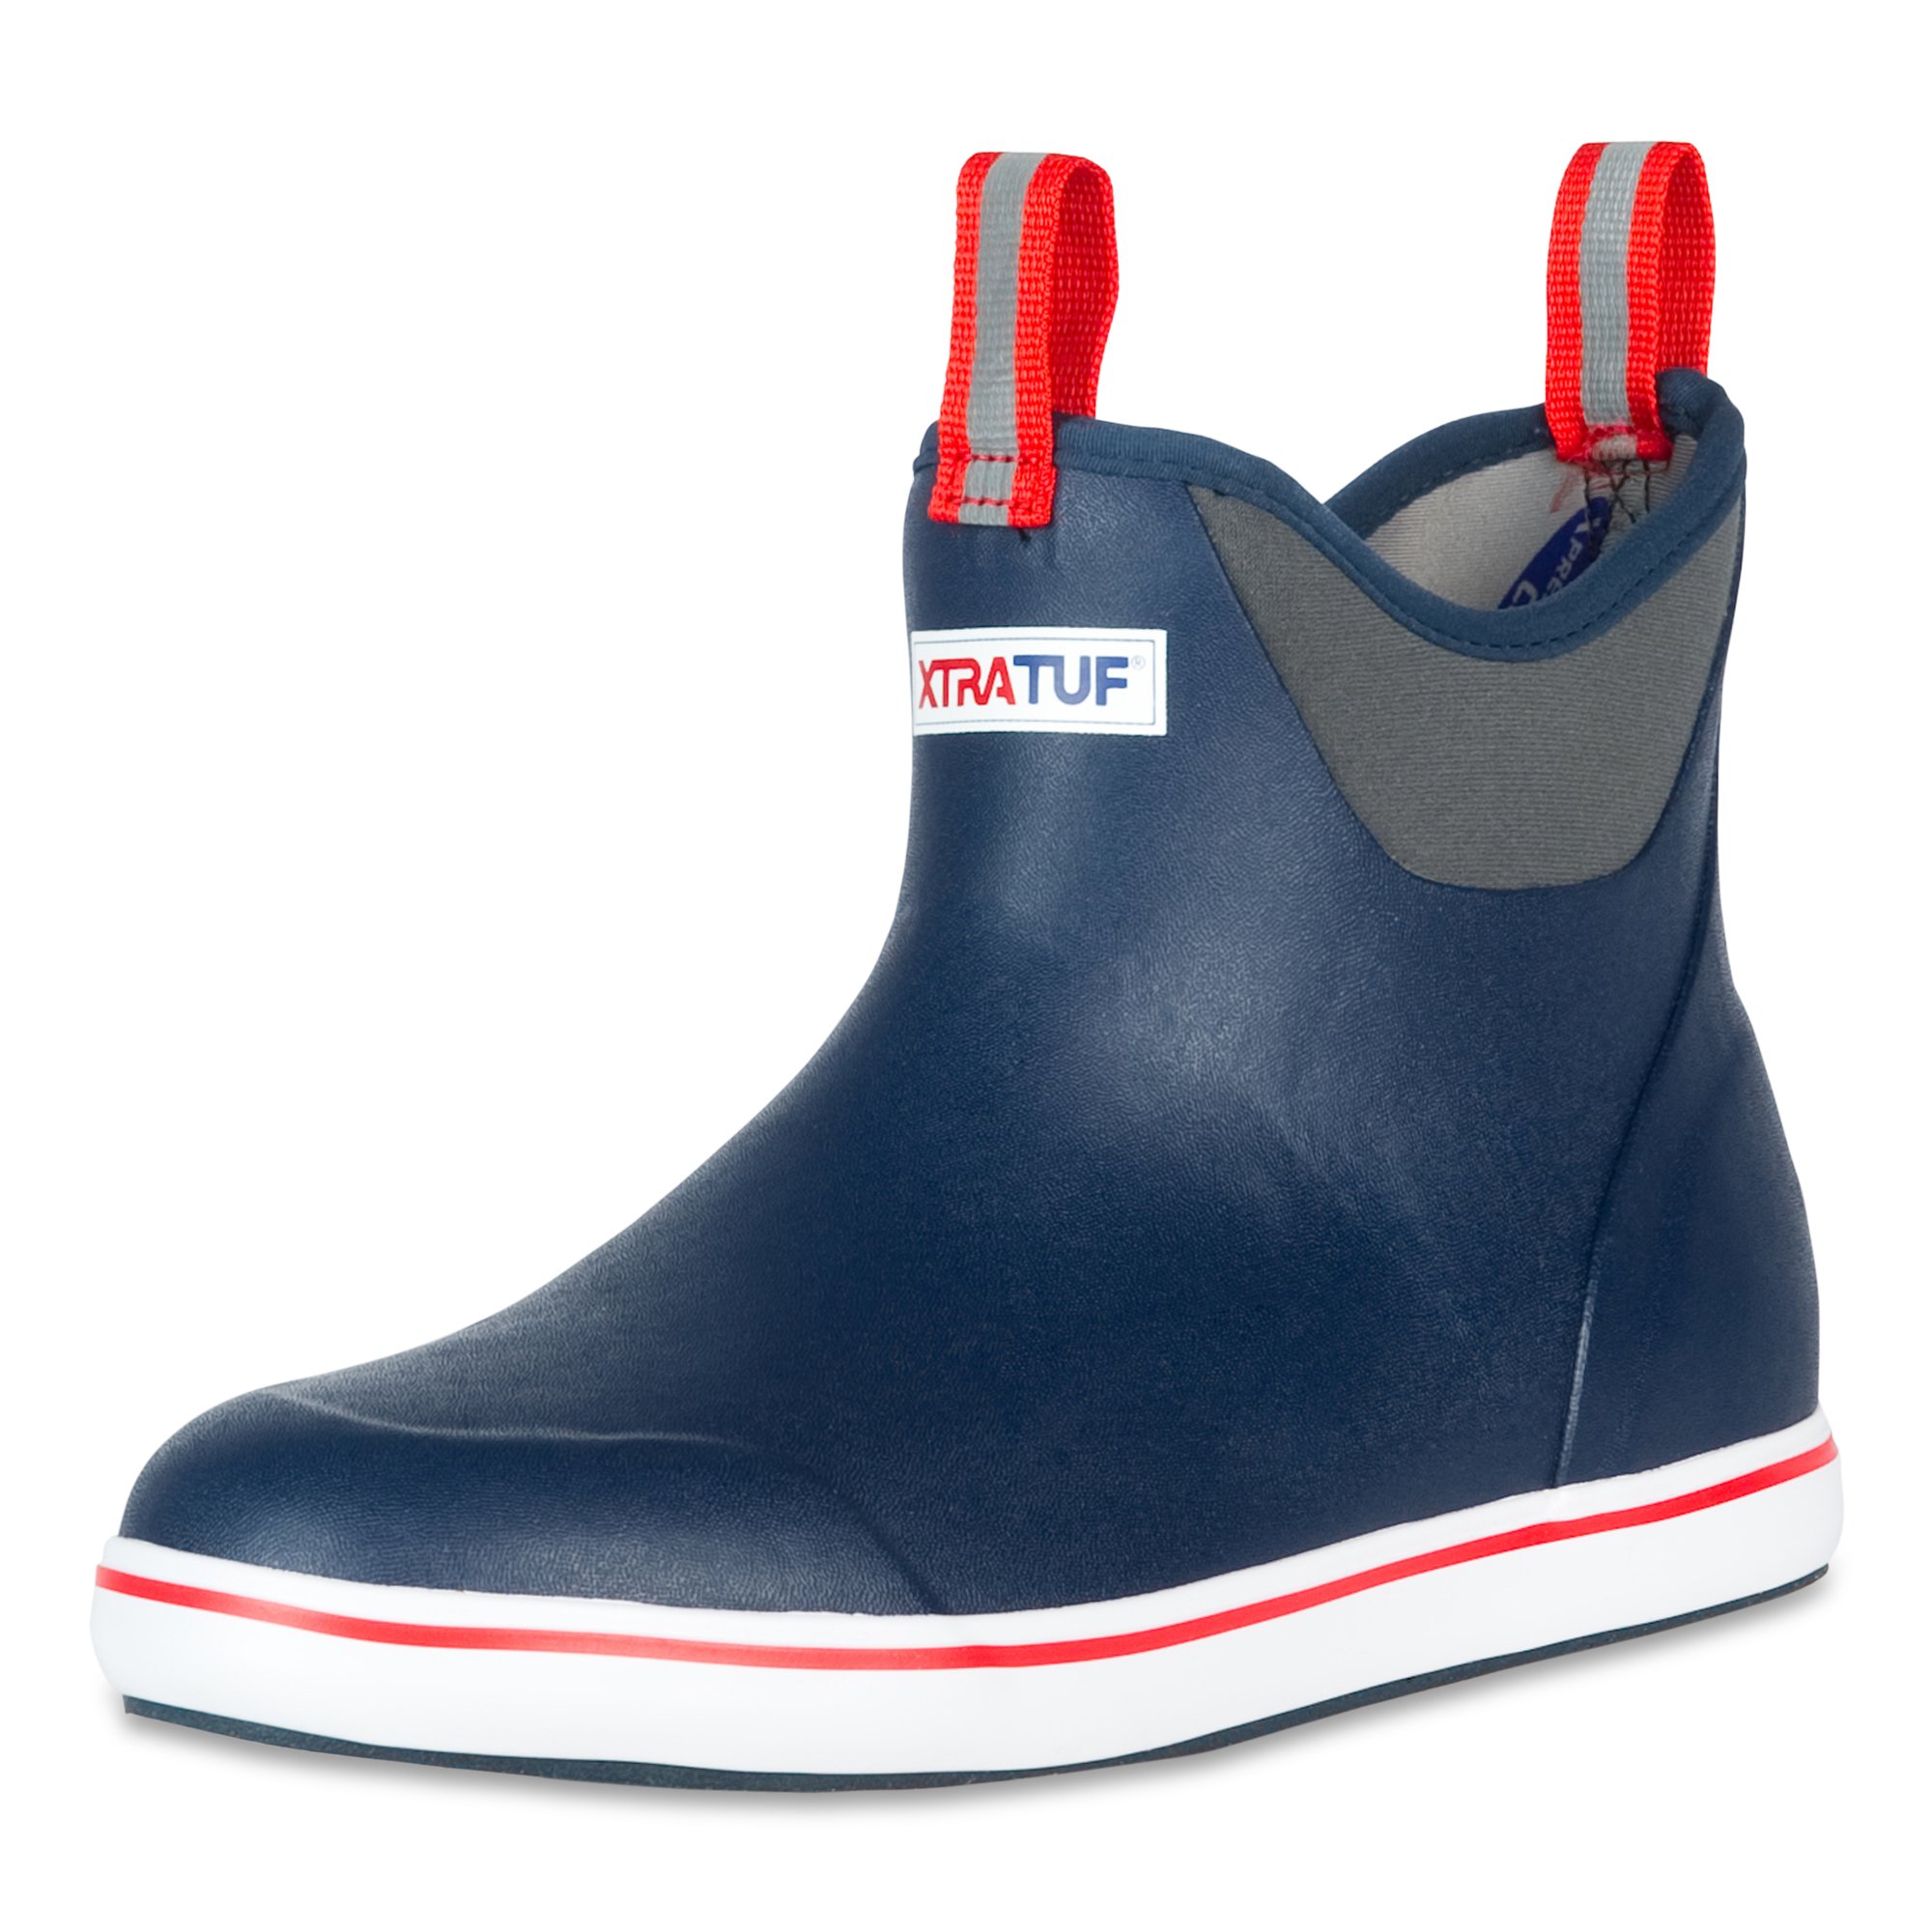 XTRATUF Performance Series 6 Inch Mens Full Rubber Ankle Deck Boots - Navy & Red  - Size 11